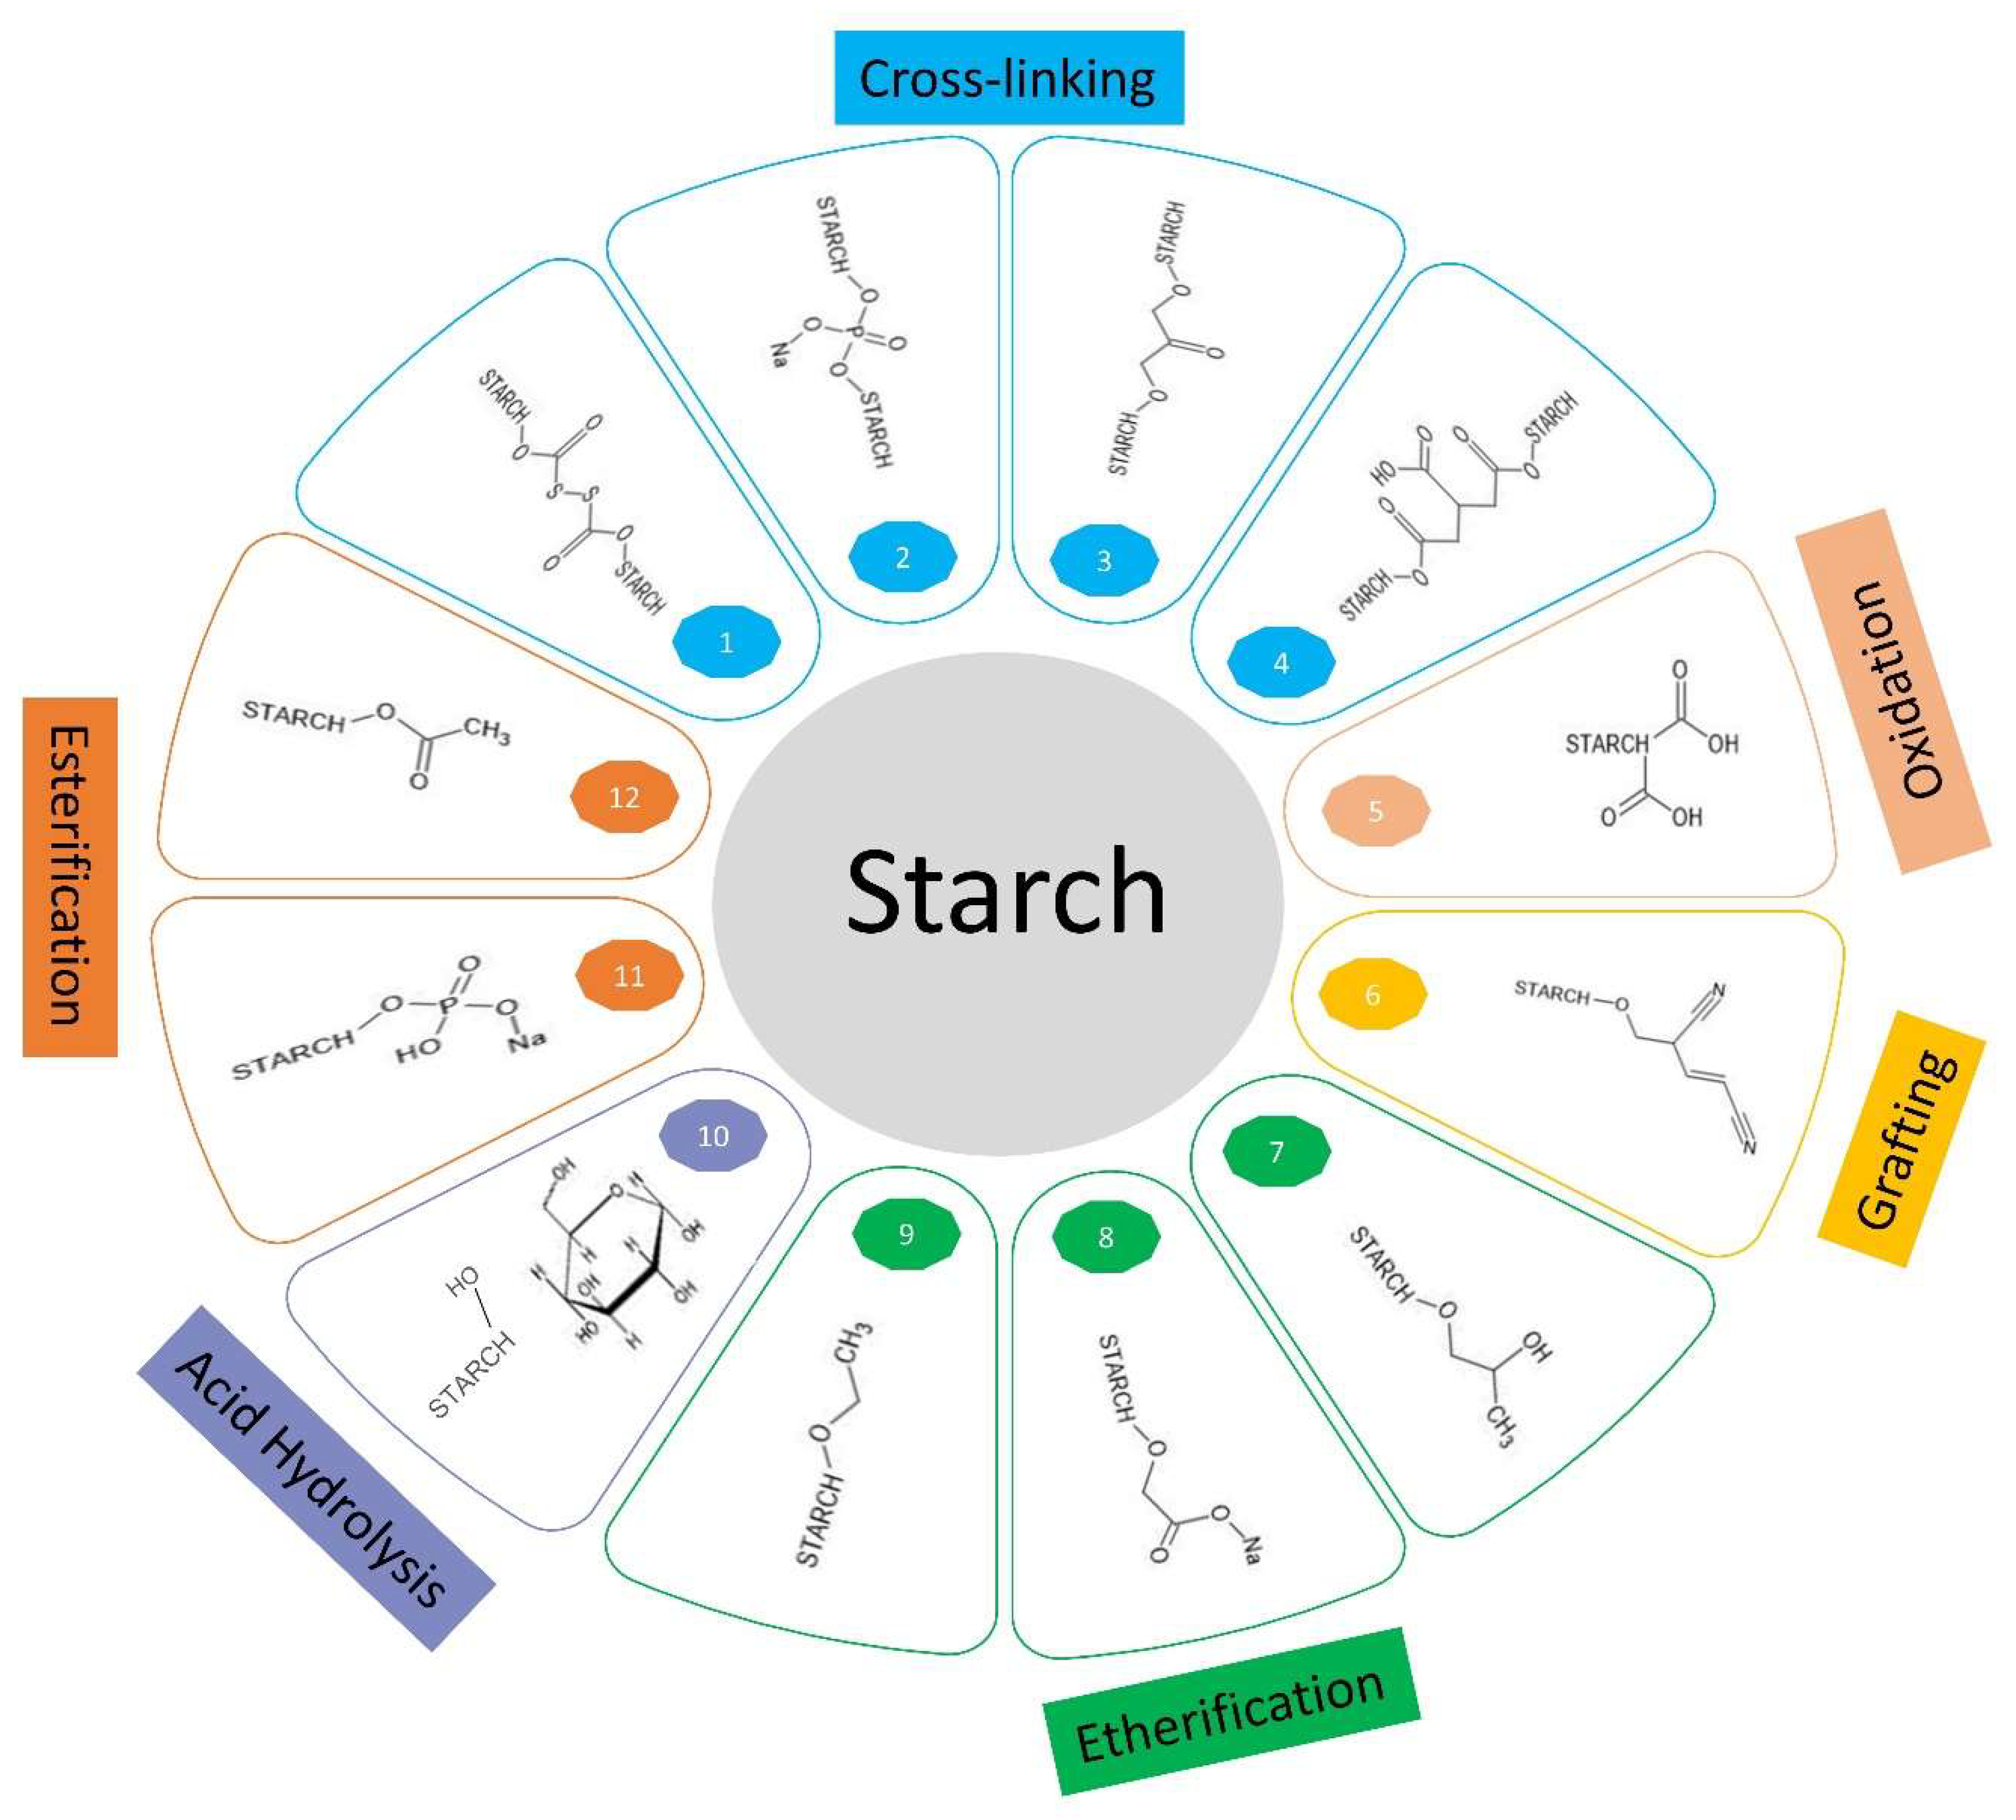 The Science Behind Liquid Starch, by Simpli Starch